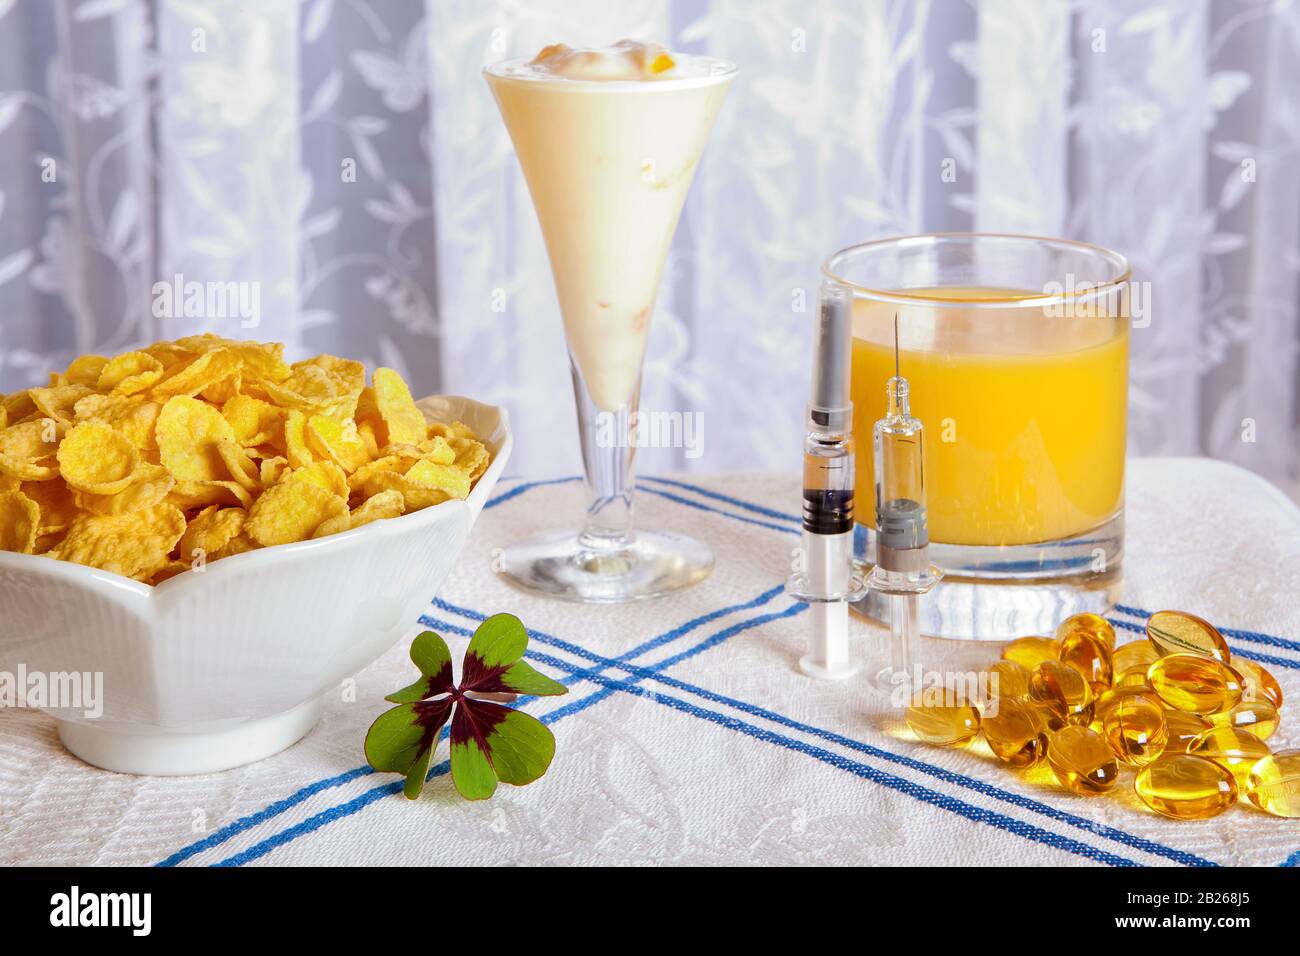 Healthy anti swine flu breakfast with vitamins, flu vaccines and a lucky clover Stock Photo